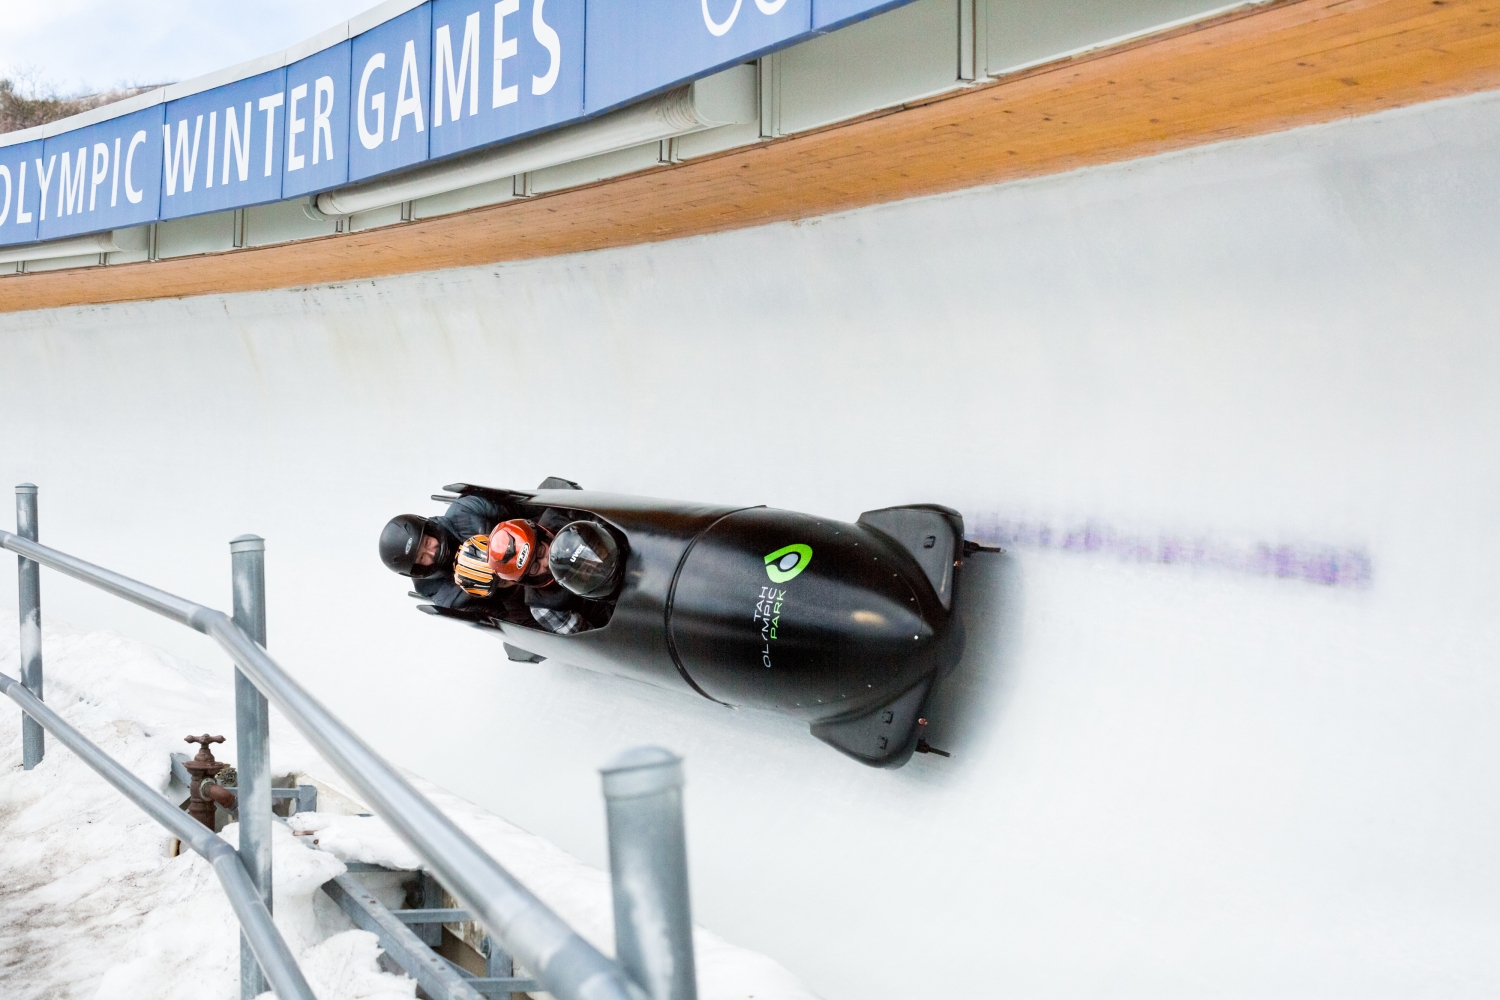 A four-man boblsled rounds a corner on the bobsled and luge track at the Utah Olympic Park in Park City, UT